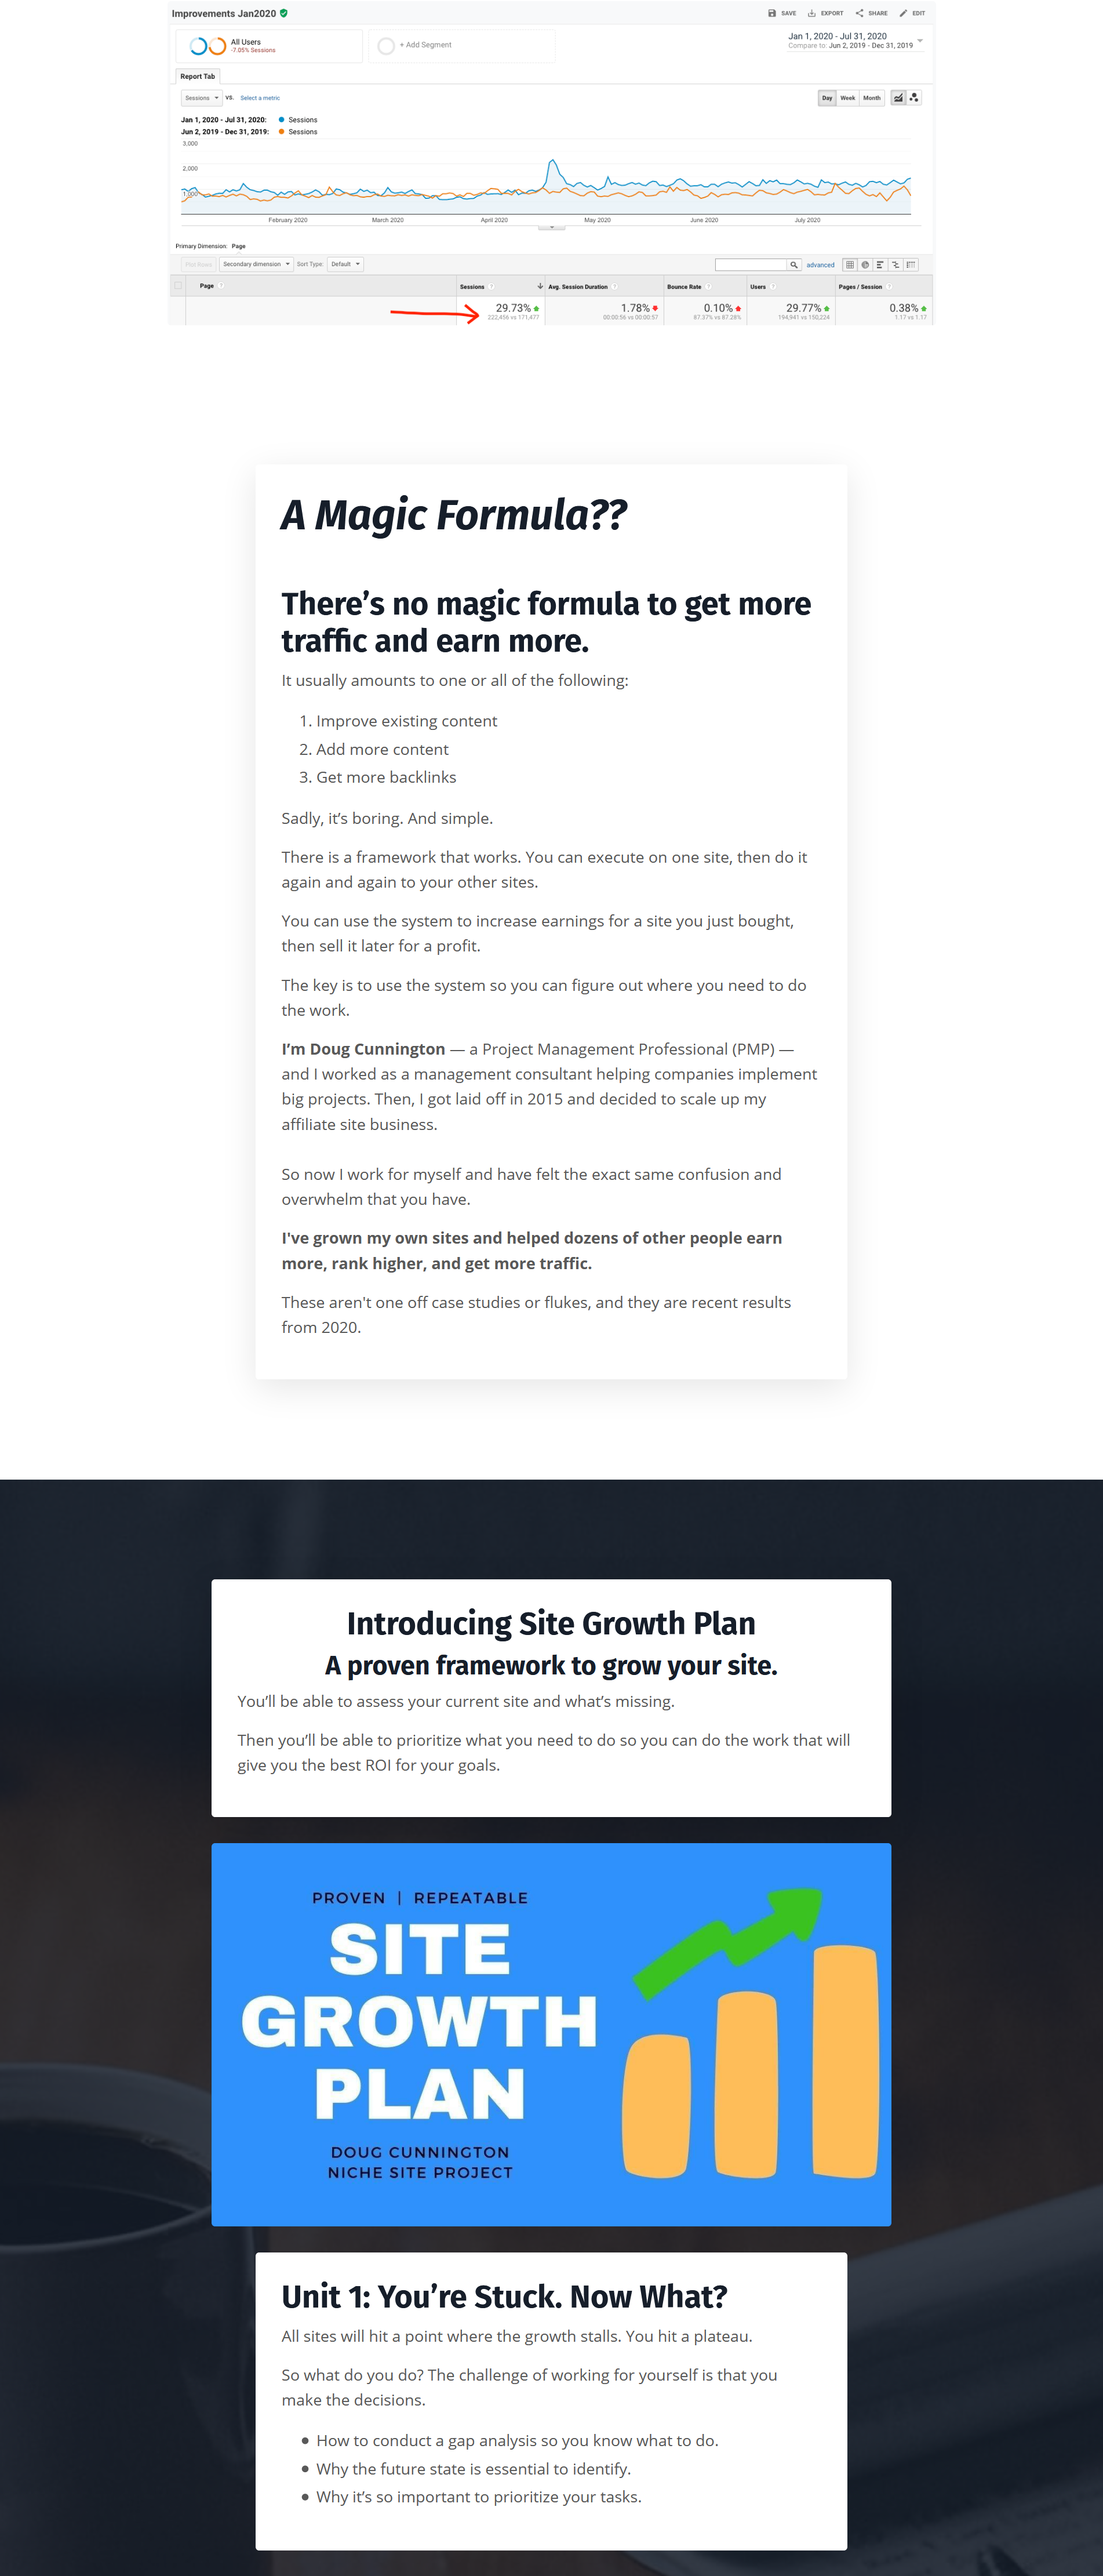 Site Growth Plan - How to Grow a Niche Site